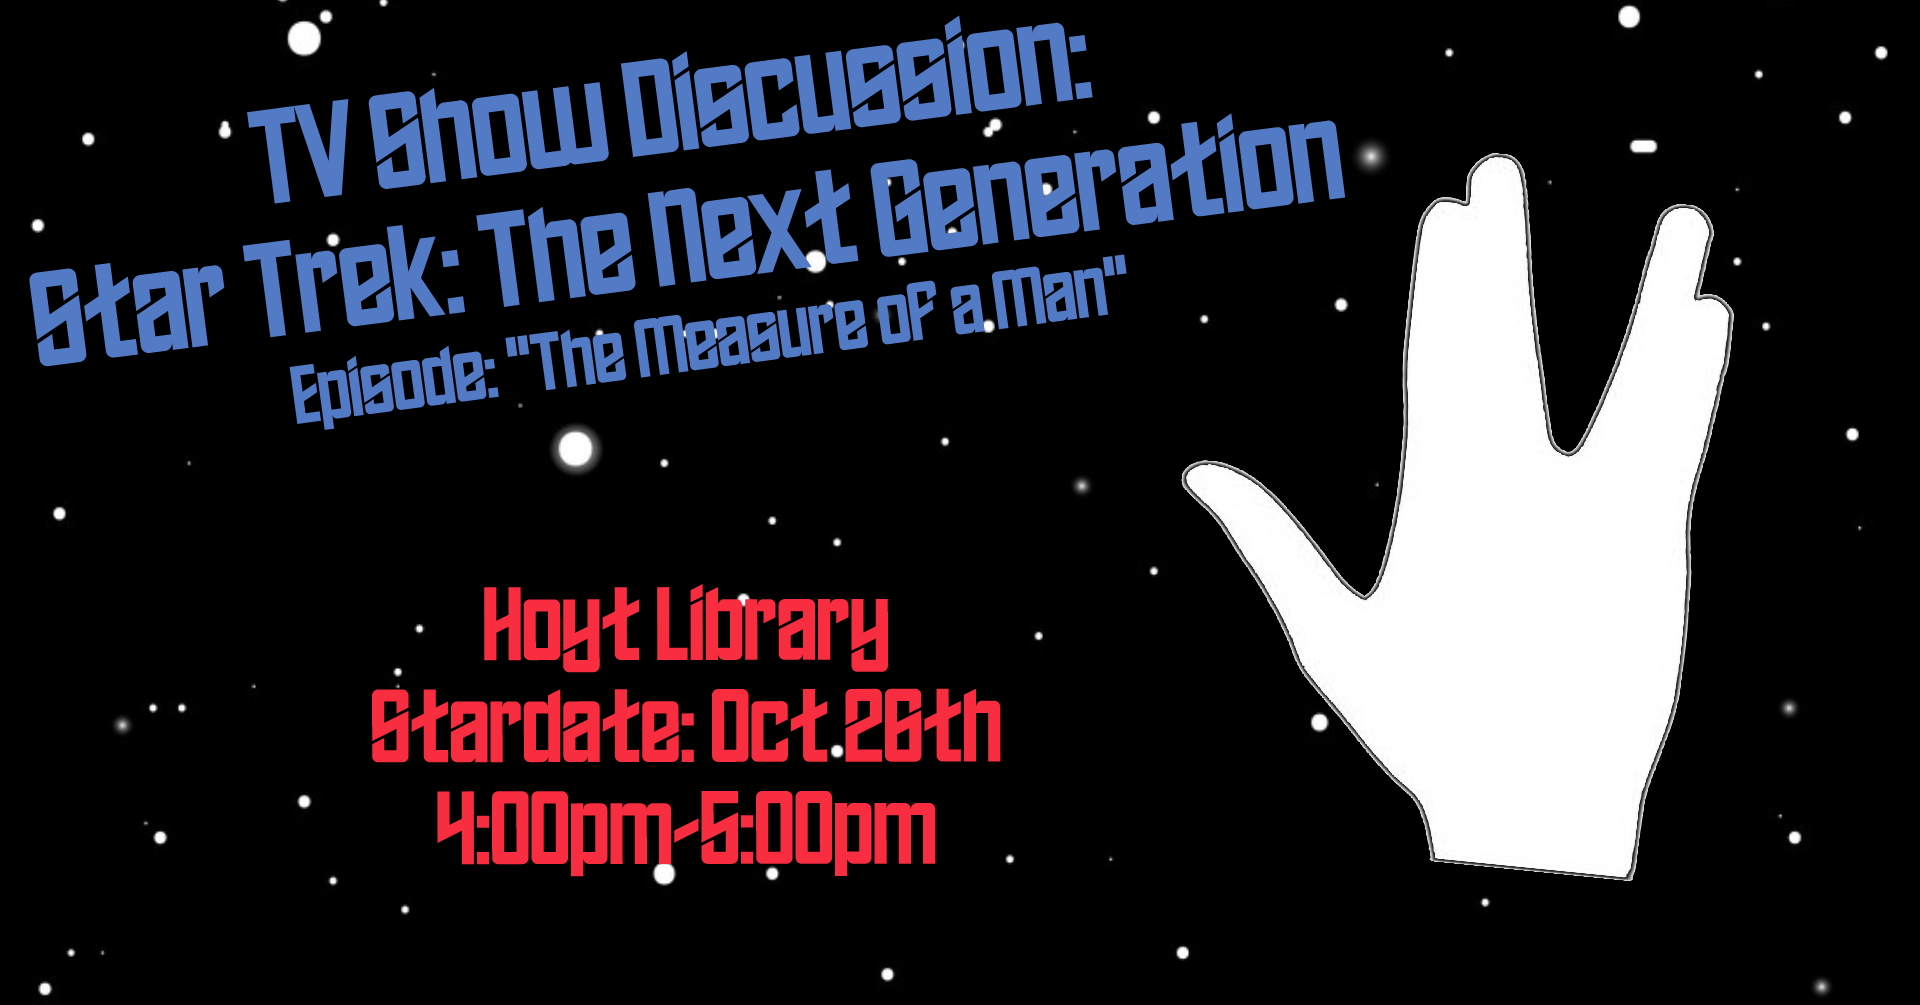 Star Trek Discussion: The Measure of a Man at Hoyt Library